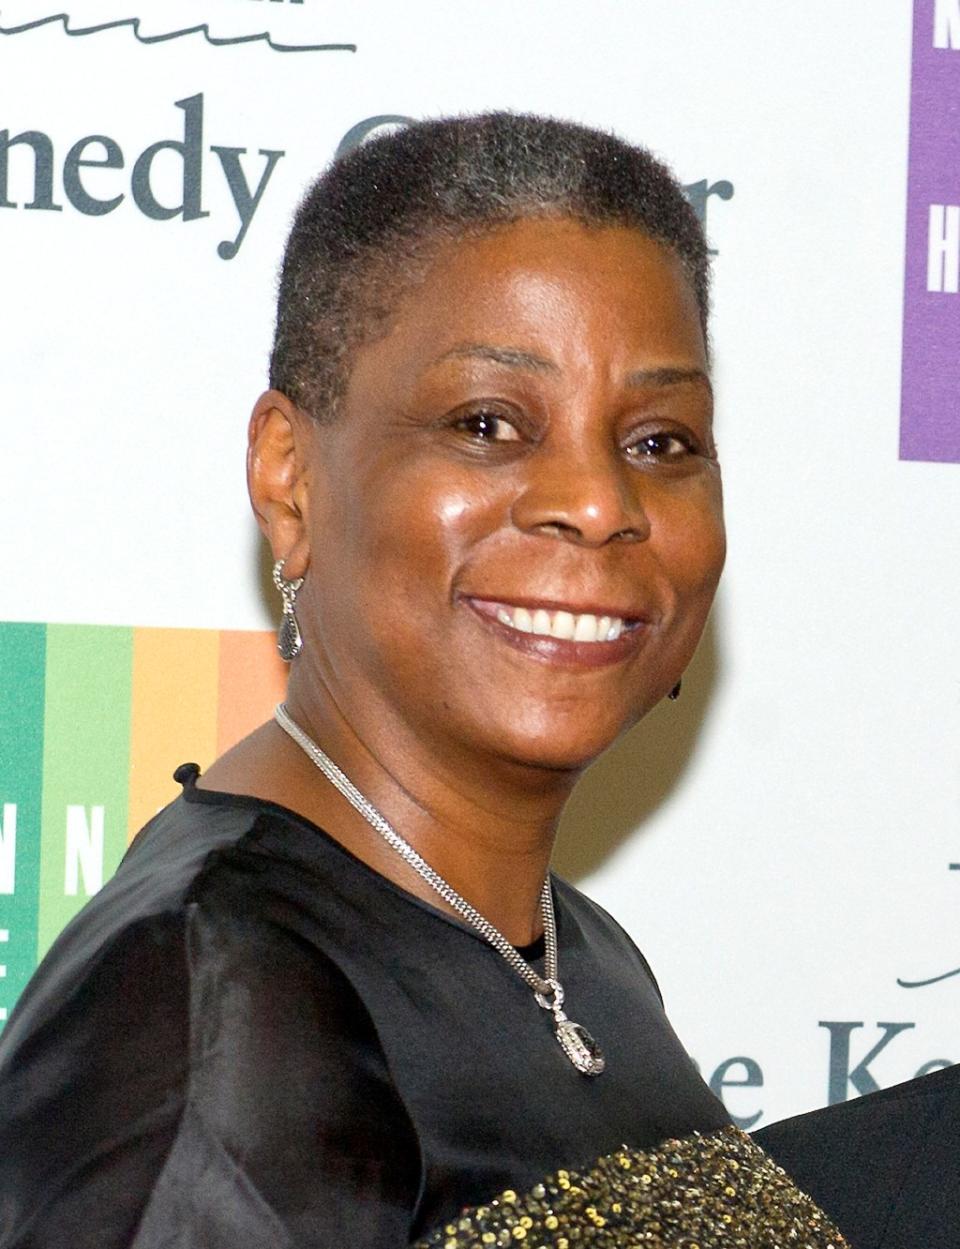 Chairman and chief executive officer of Xerox, Ursula M. Burns attends the 2014 Kennedy Center Honors Gala Dinner at the U.S. Department of State on Dec. 6, 2014, in Washington, D.C. (Photo by Ron Sachs-Pool/Getty Images)